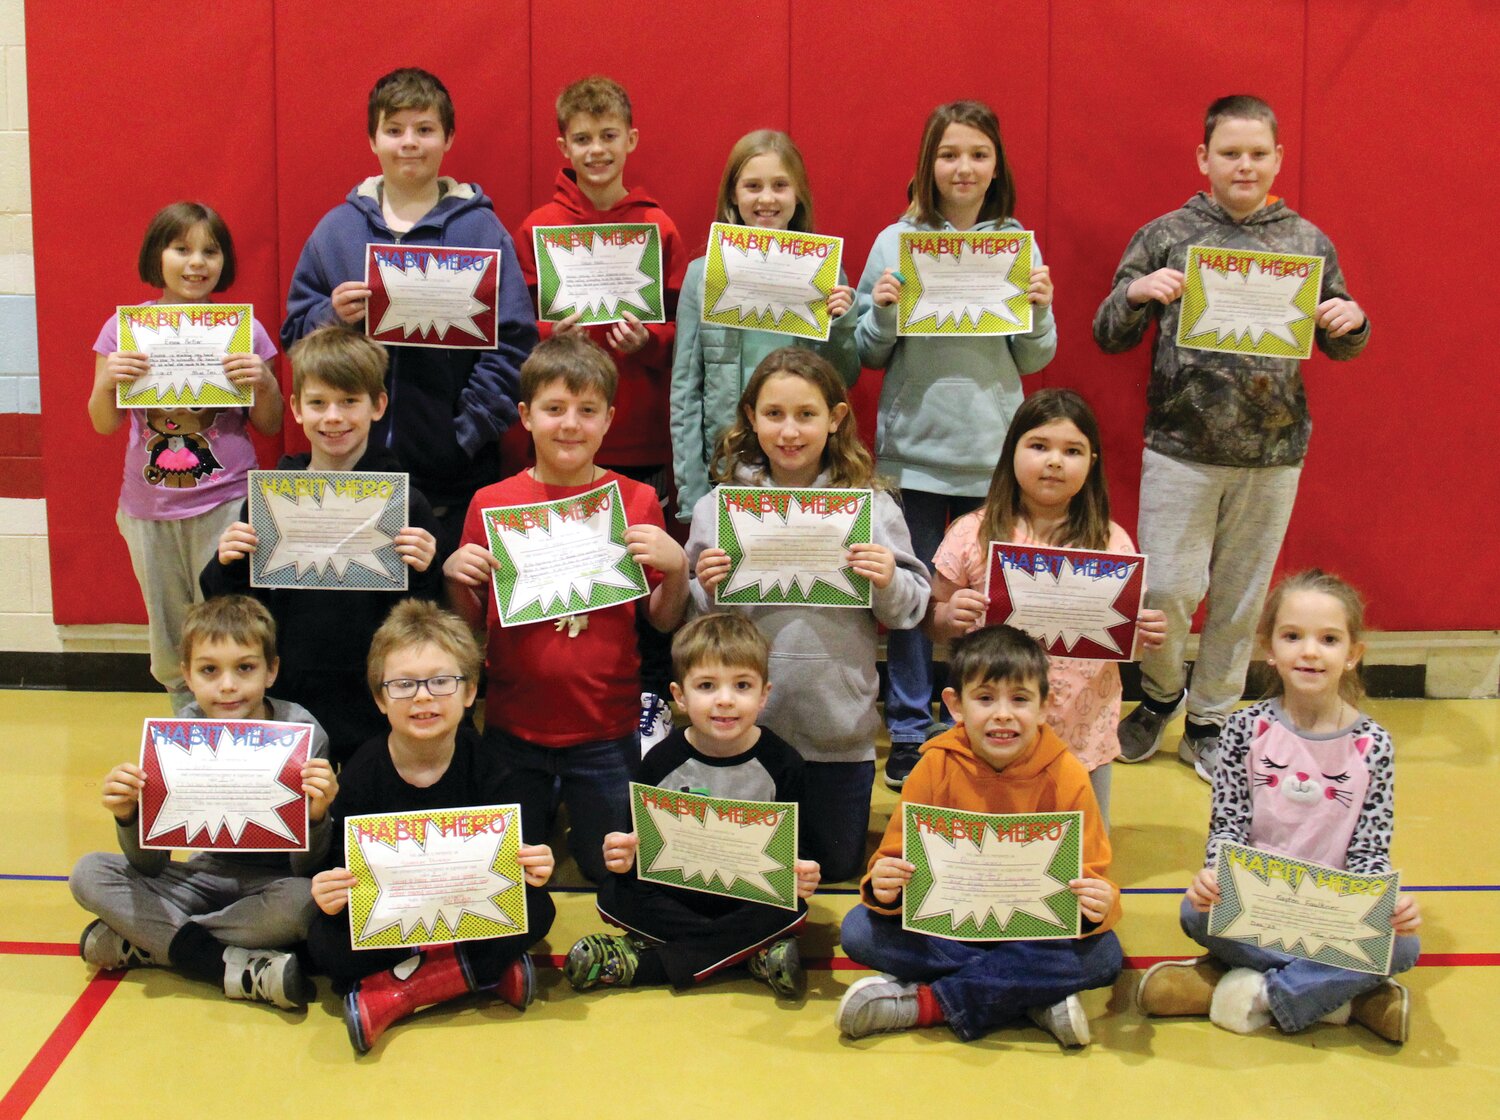 As a part of their Leader in Me program, Turkey Run Elementary students received Habit Hero Awards. Habit Hero awards are given to students who set an example by being a good leader and demonstrate one of the seven habits. Awards are presented by staff members to students who they believe have excelled in one of the habits. Earning Habit Hero awards for December are front row, TJ Girdler, Spencer Portier, Parker Crawford-Edwards, Oliver Games and Kayten Faulkner; middle-row, Hendrix Shannon, Eli White, Kendall Thomas and Autumn Wirth; and back row, Emma Portier, Tanner Back, Jaxson Woods, Emma Hill, Hope Jeffers and Liam Wilcox.